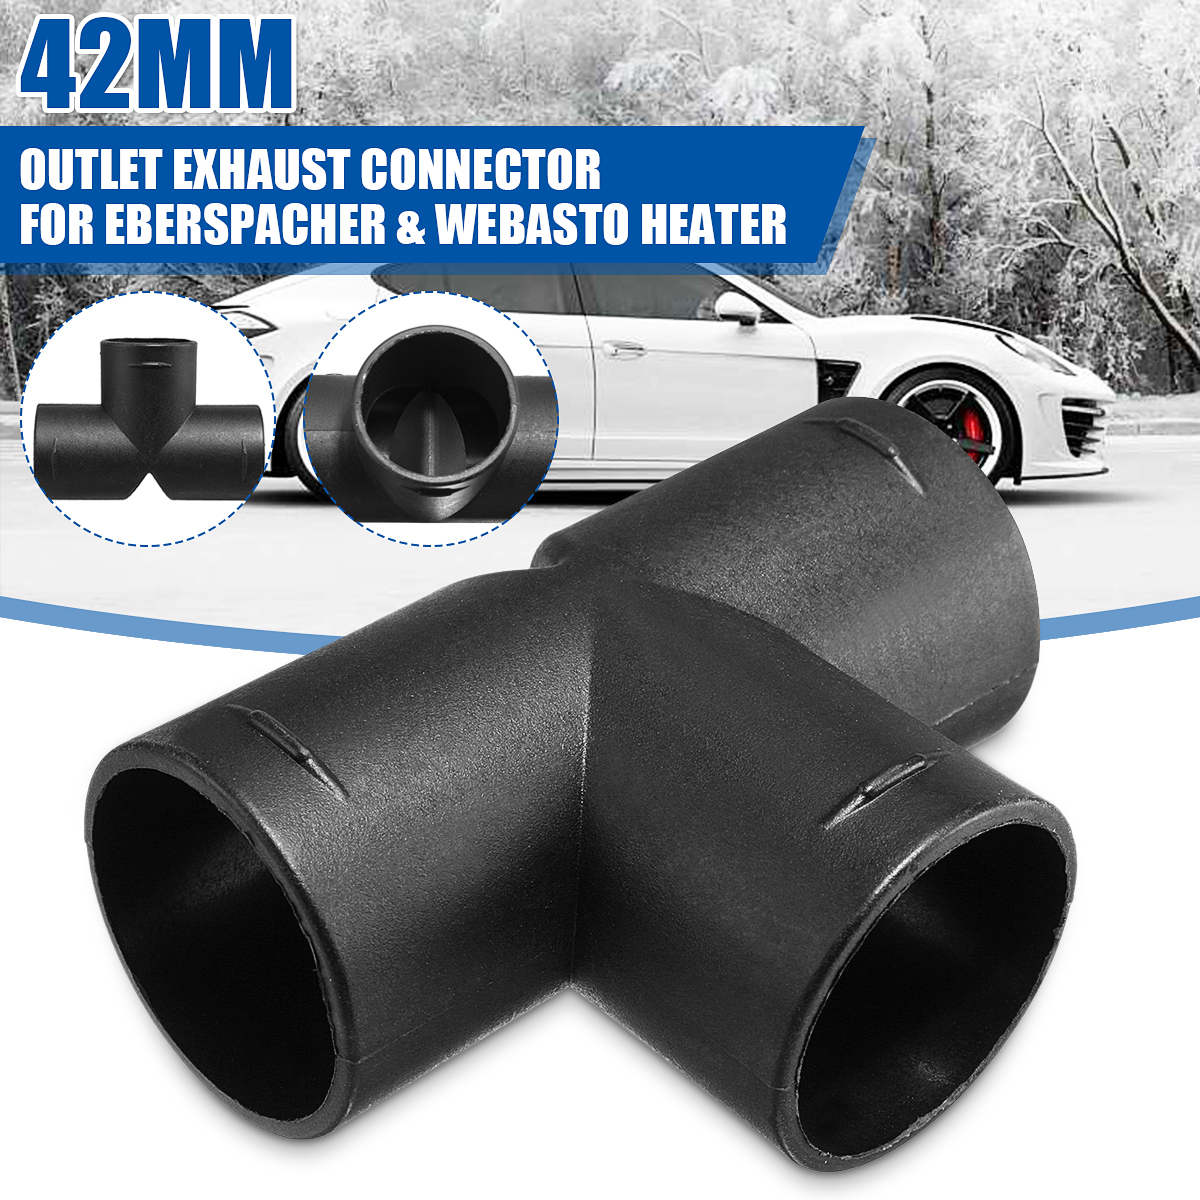 42mm-Air-Vent-Ducting-T-Piece-Outlet-Exhaust-Connector-For-Eberspacher-Heater-1623748-2